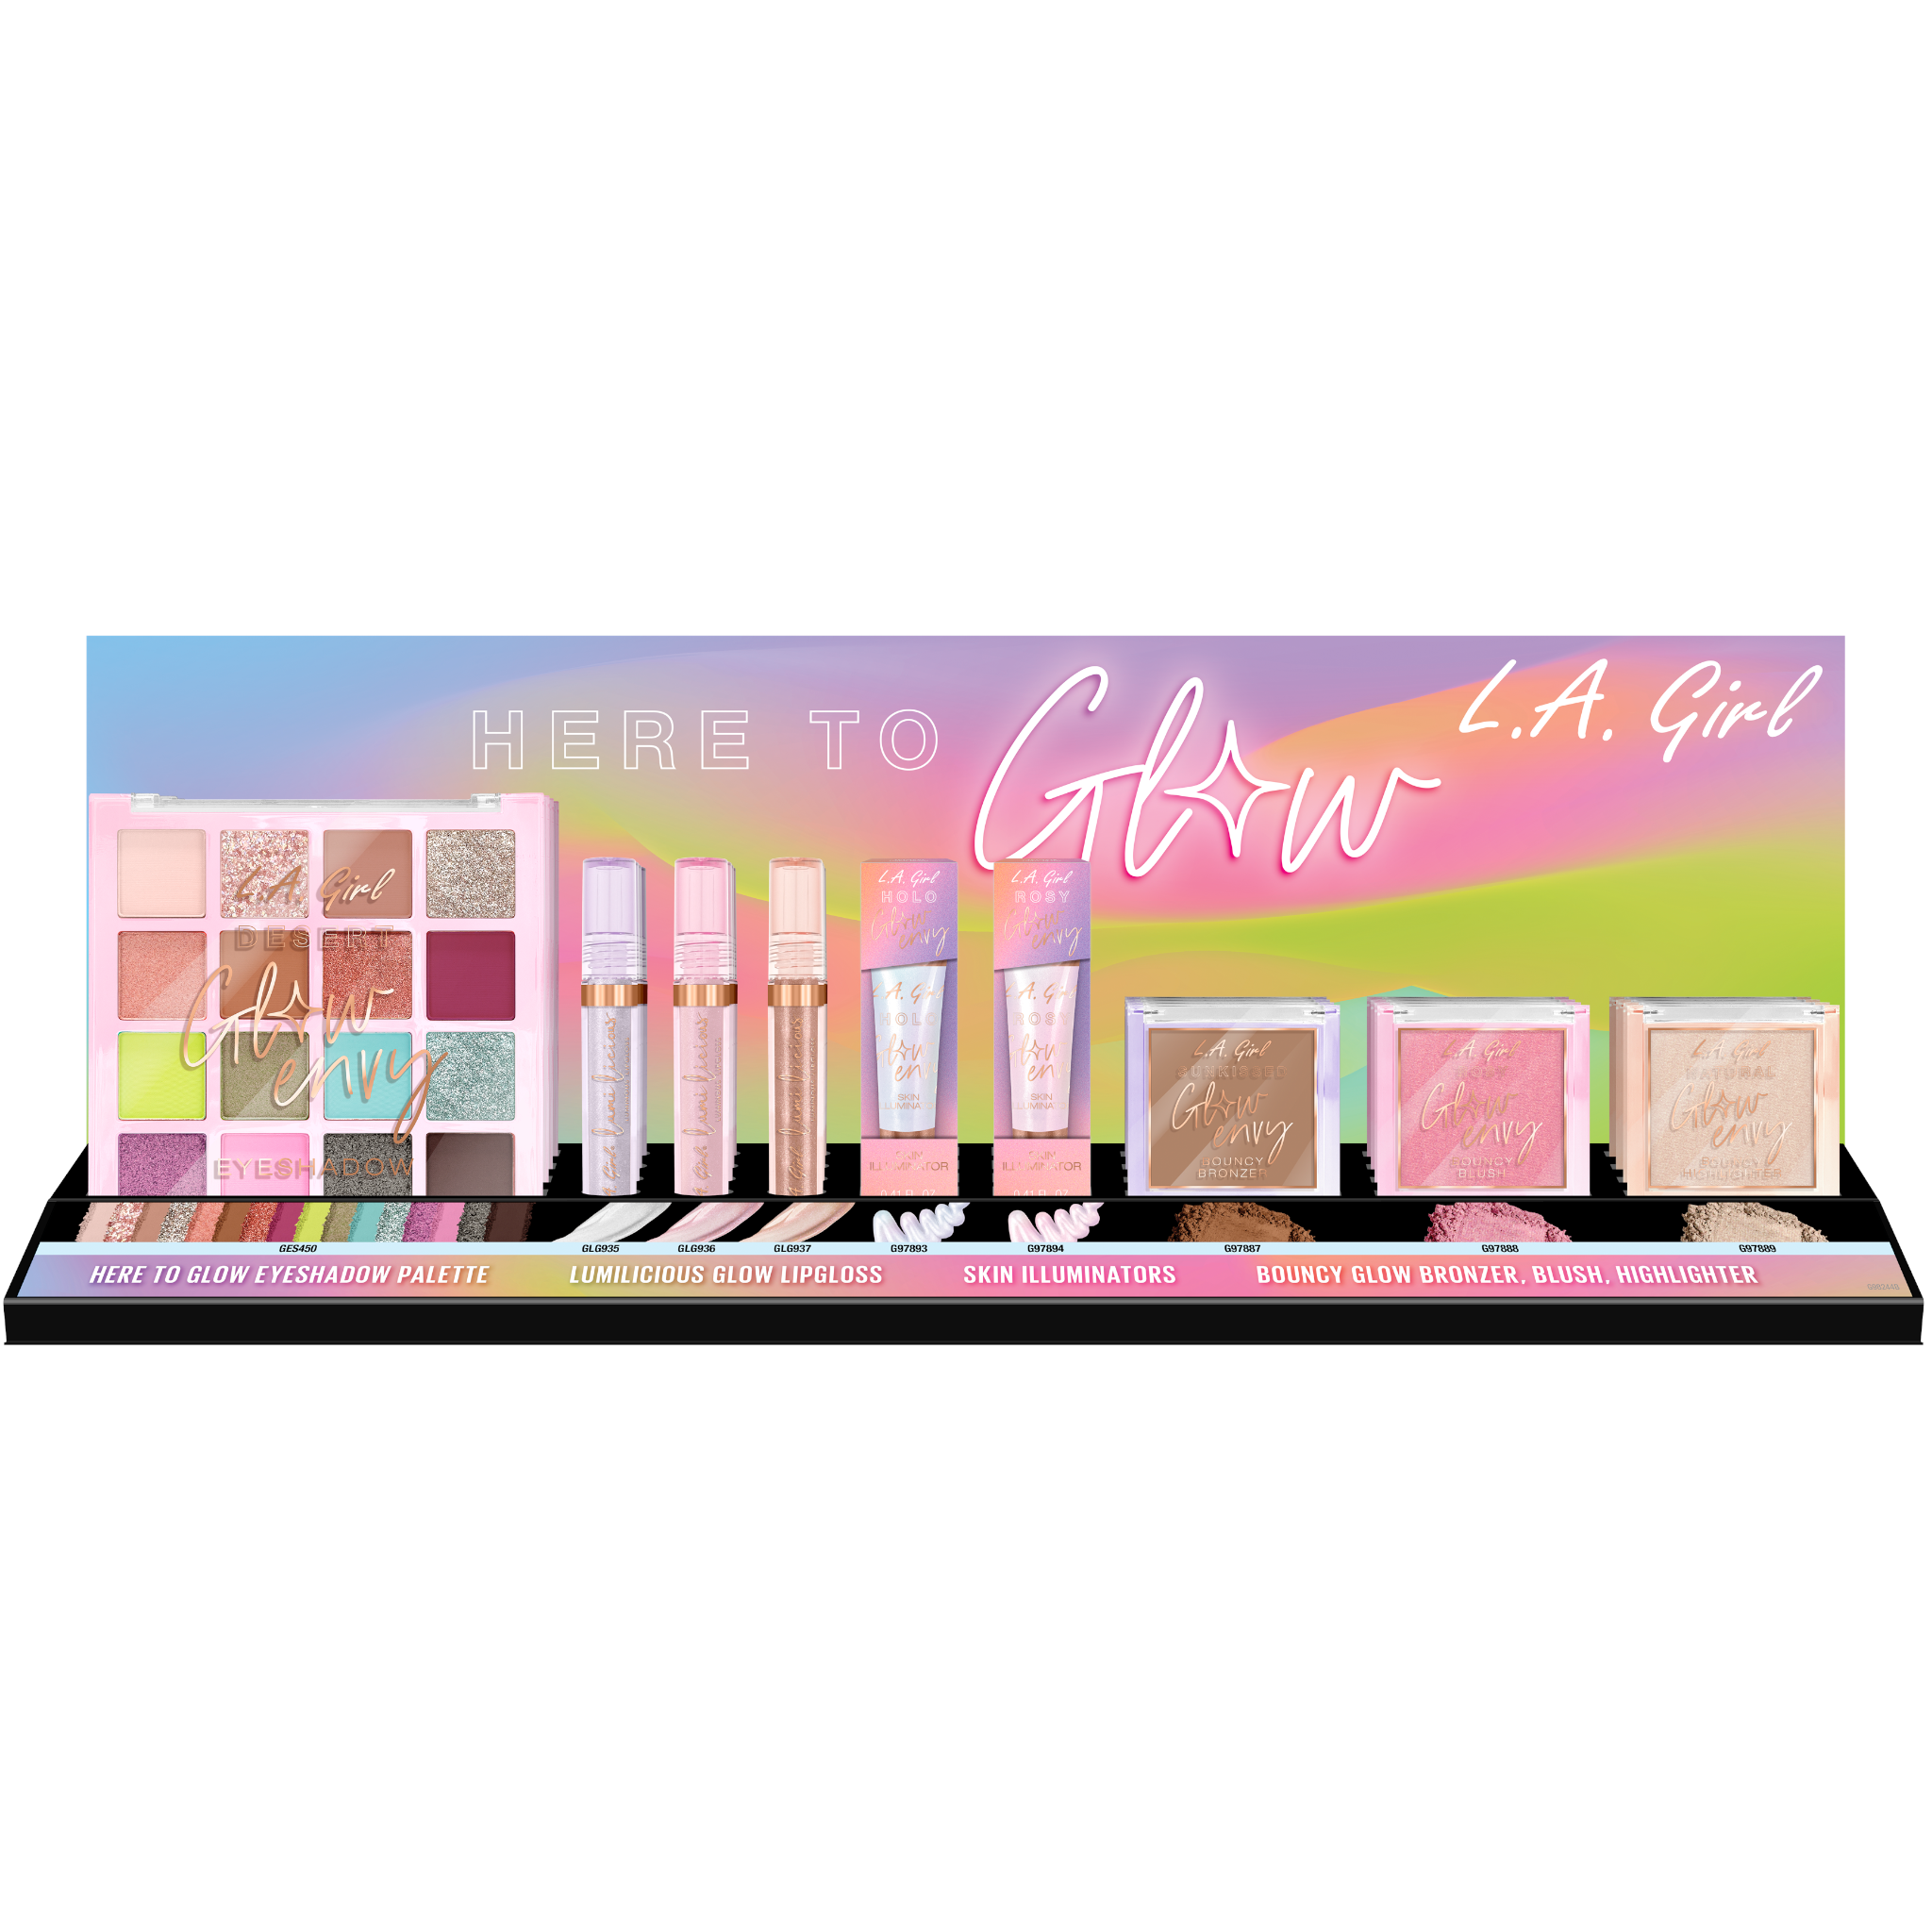 L.A. Girl Here To Glow - Wholesale Display 36 Units (G98244)